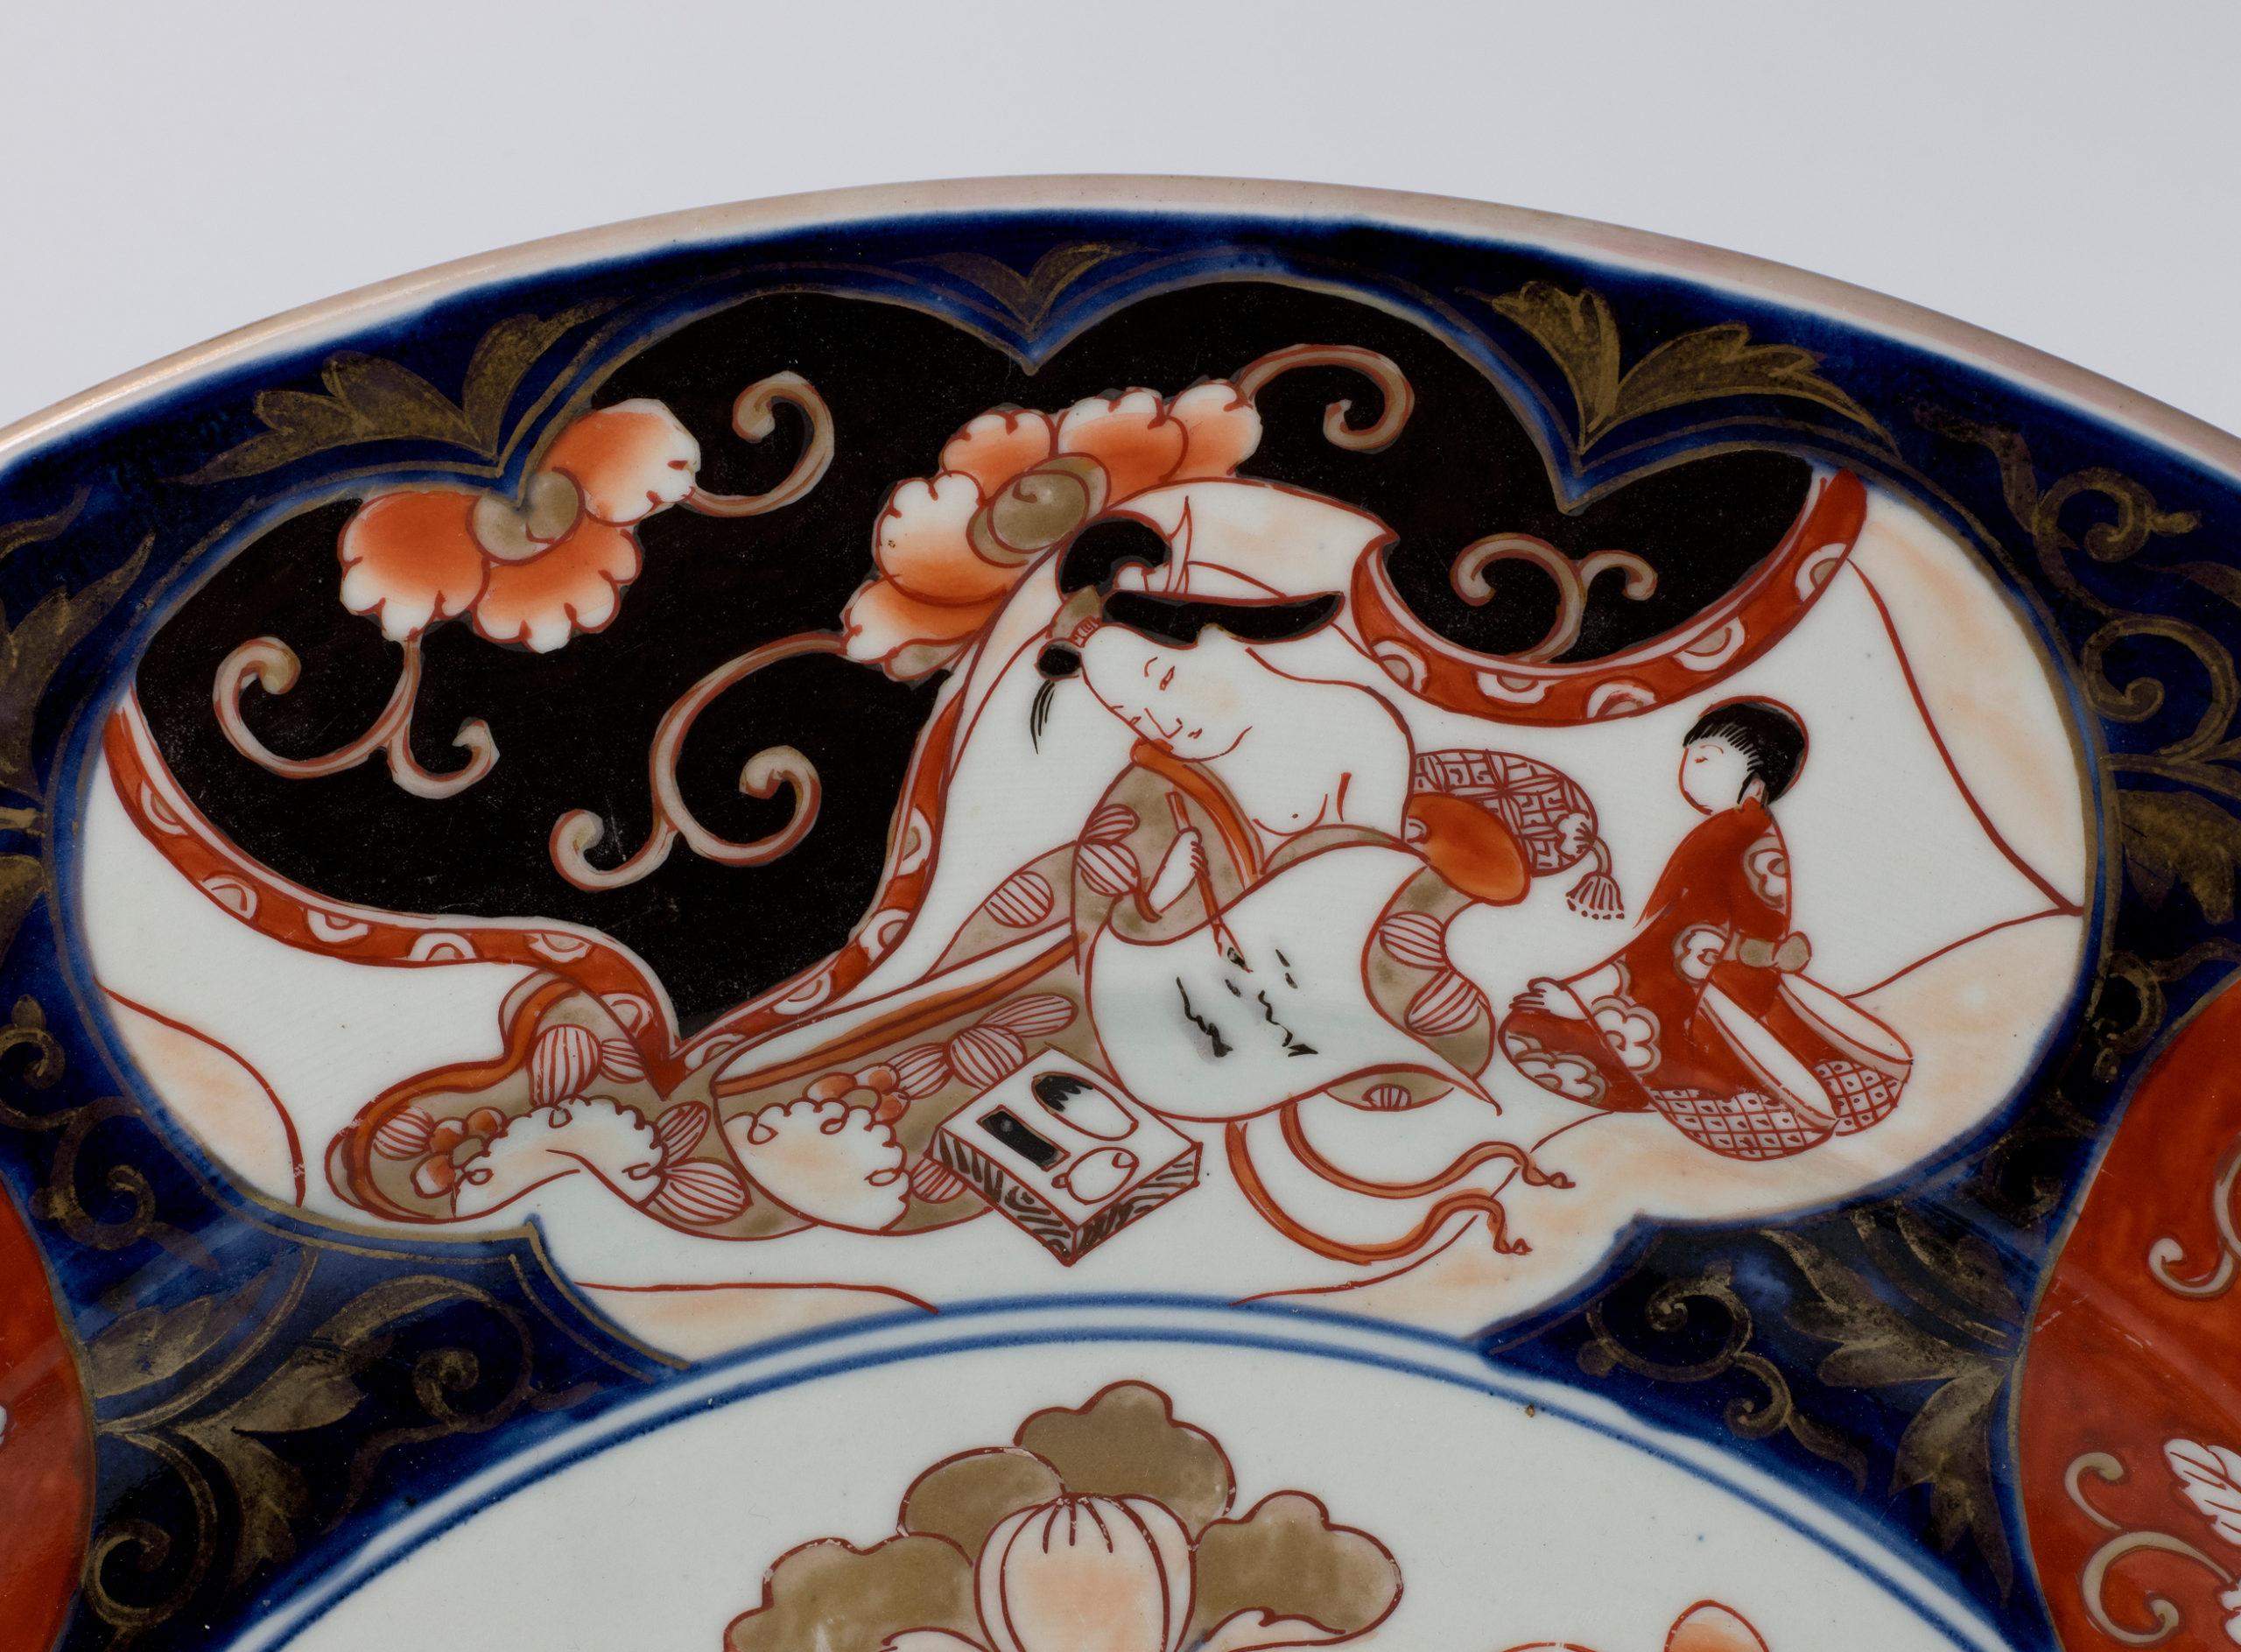 As part of our Japanese works of art collection we are delighted to offer this outstanding condition Edo Period 1612-1868, circa 1700, very large Imari palette charger manufactured at the Arita kilns in the late 17th early 18th century during the